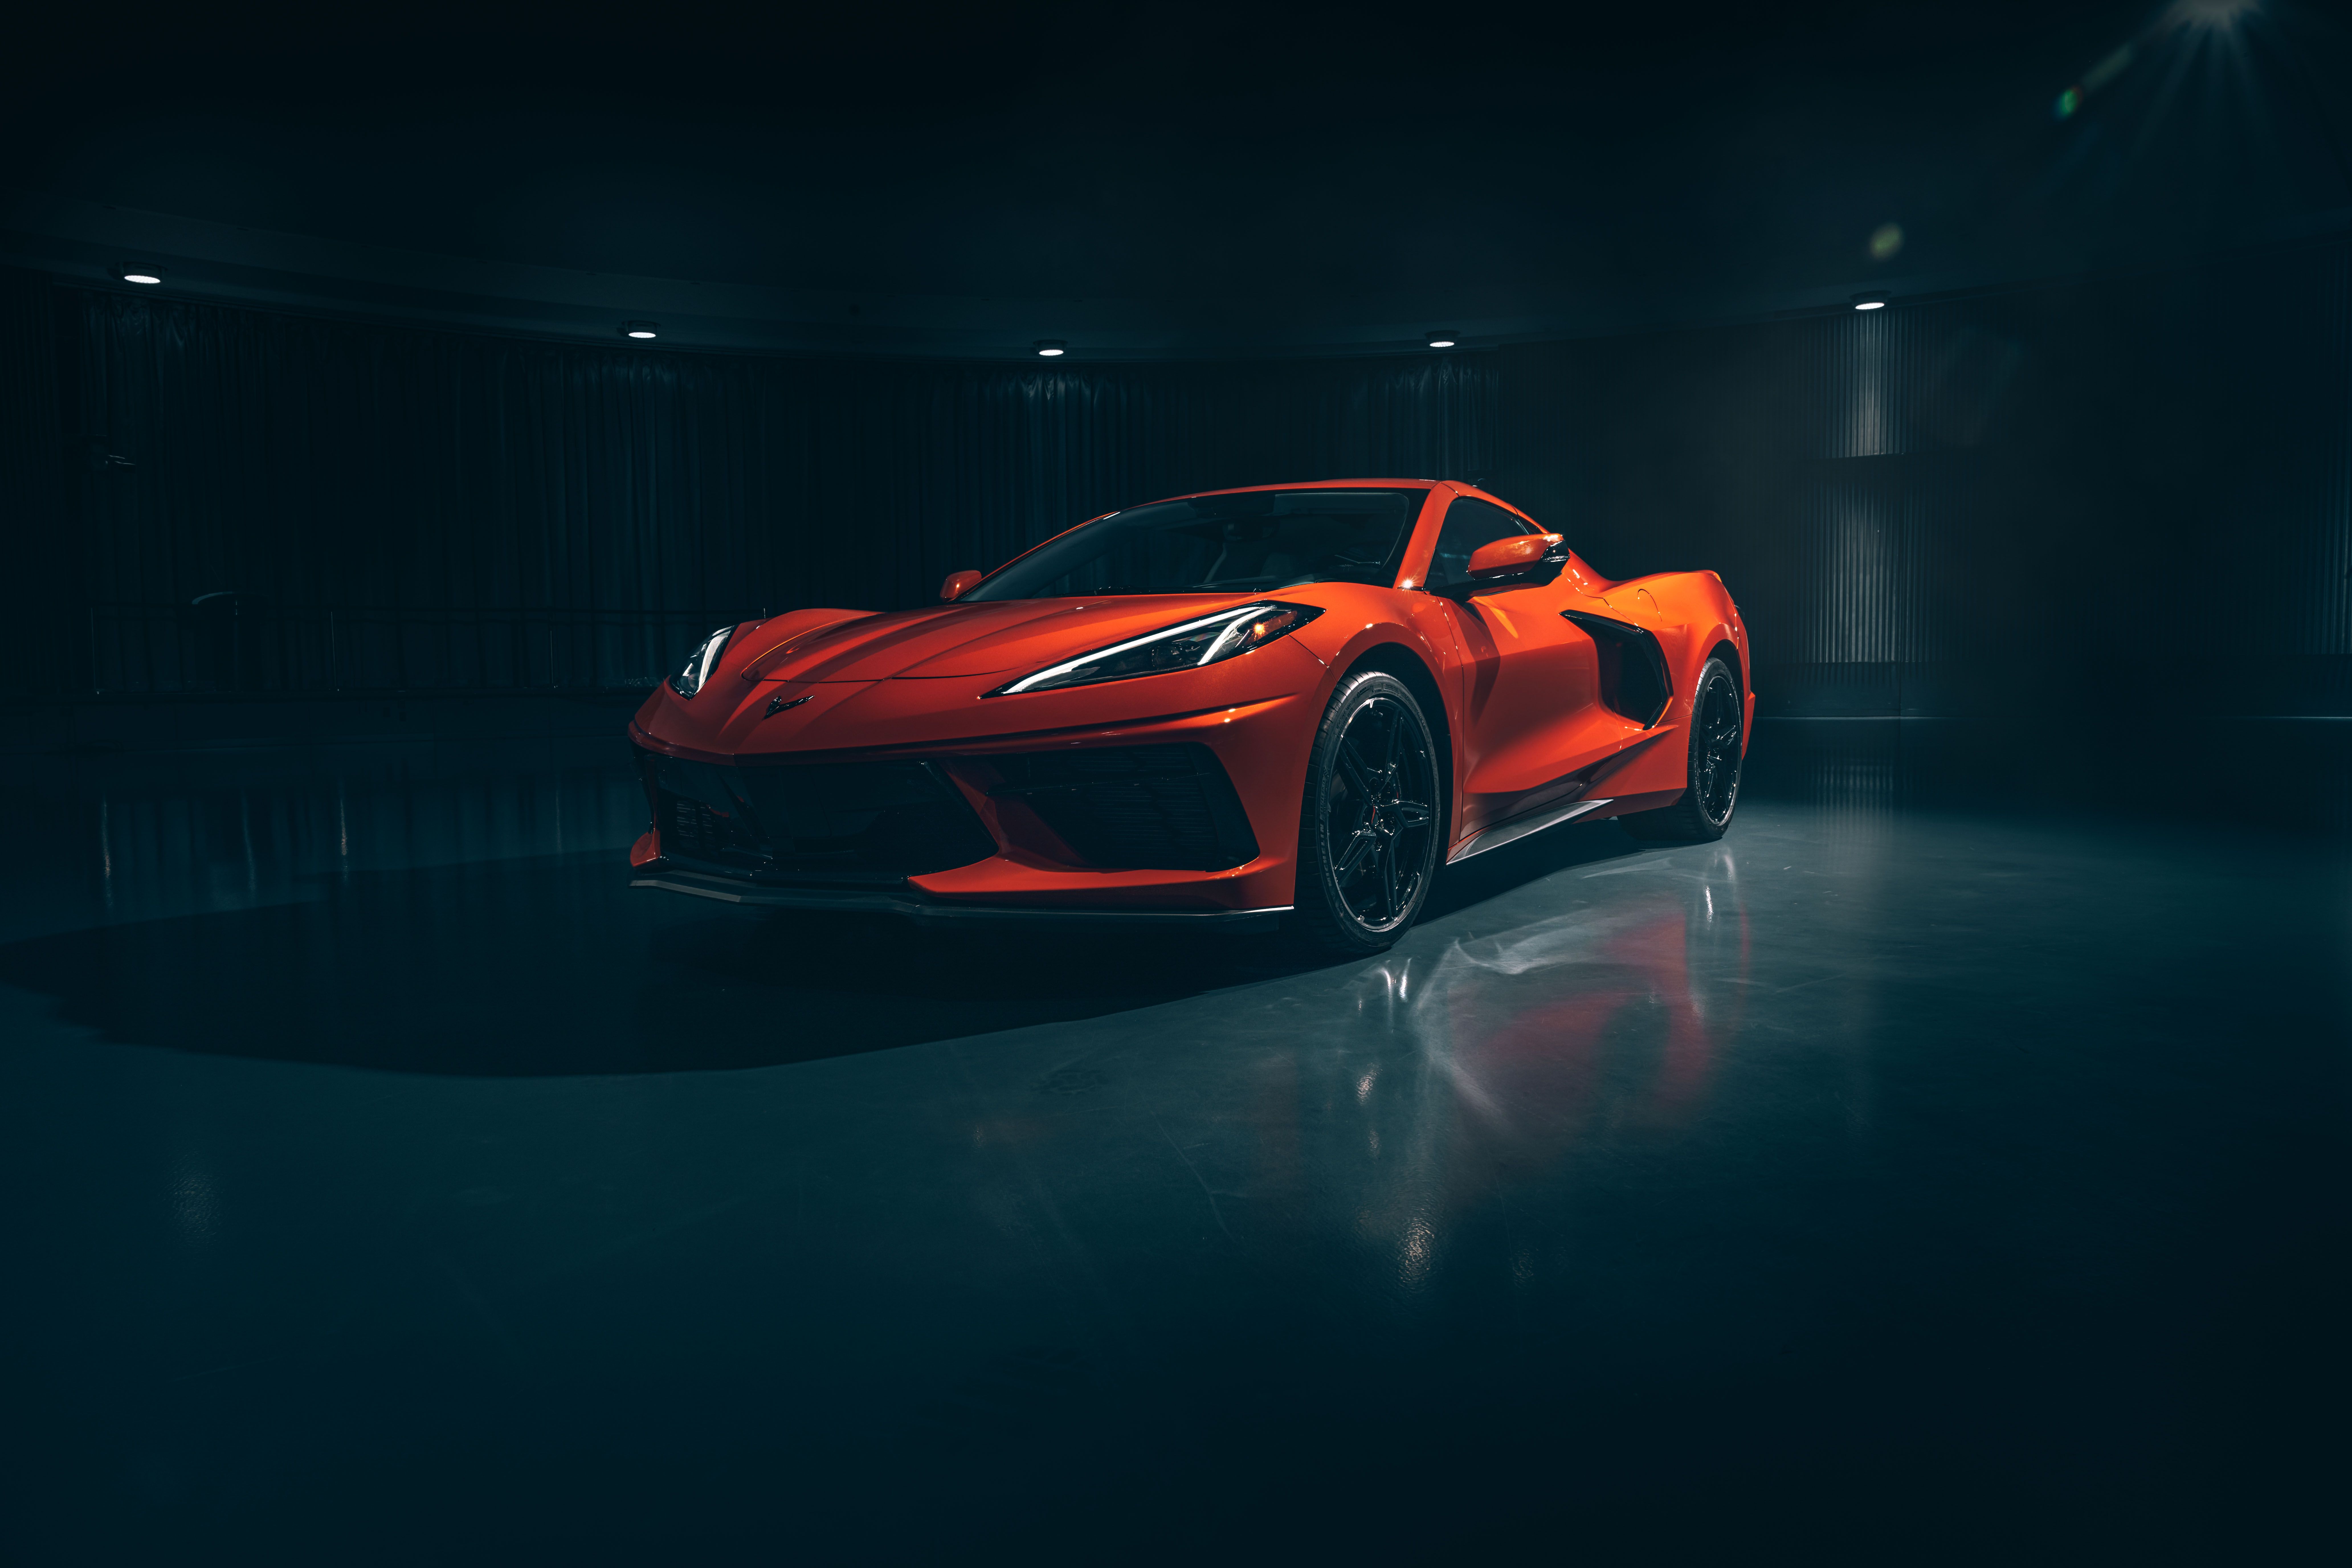 General Motors president discusses new fully electric Corvette and